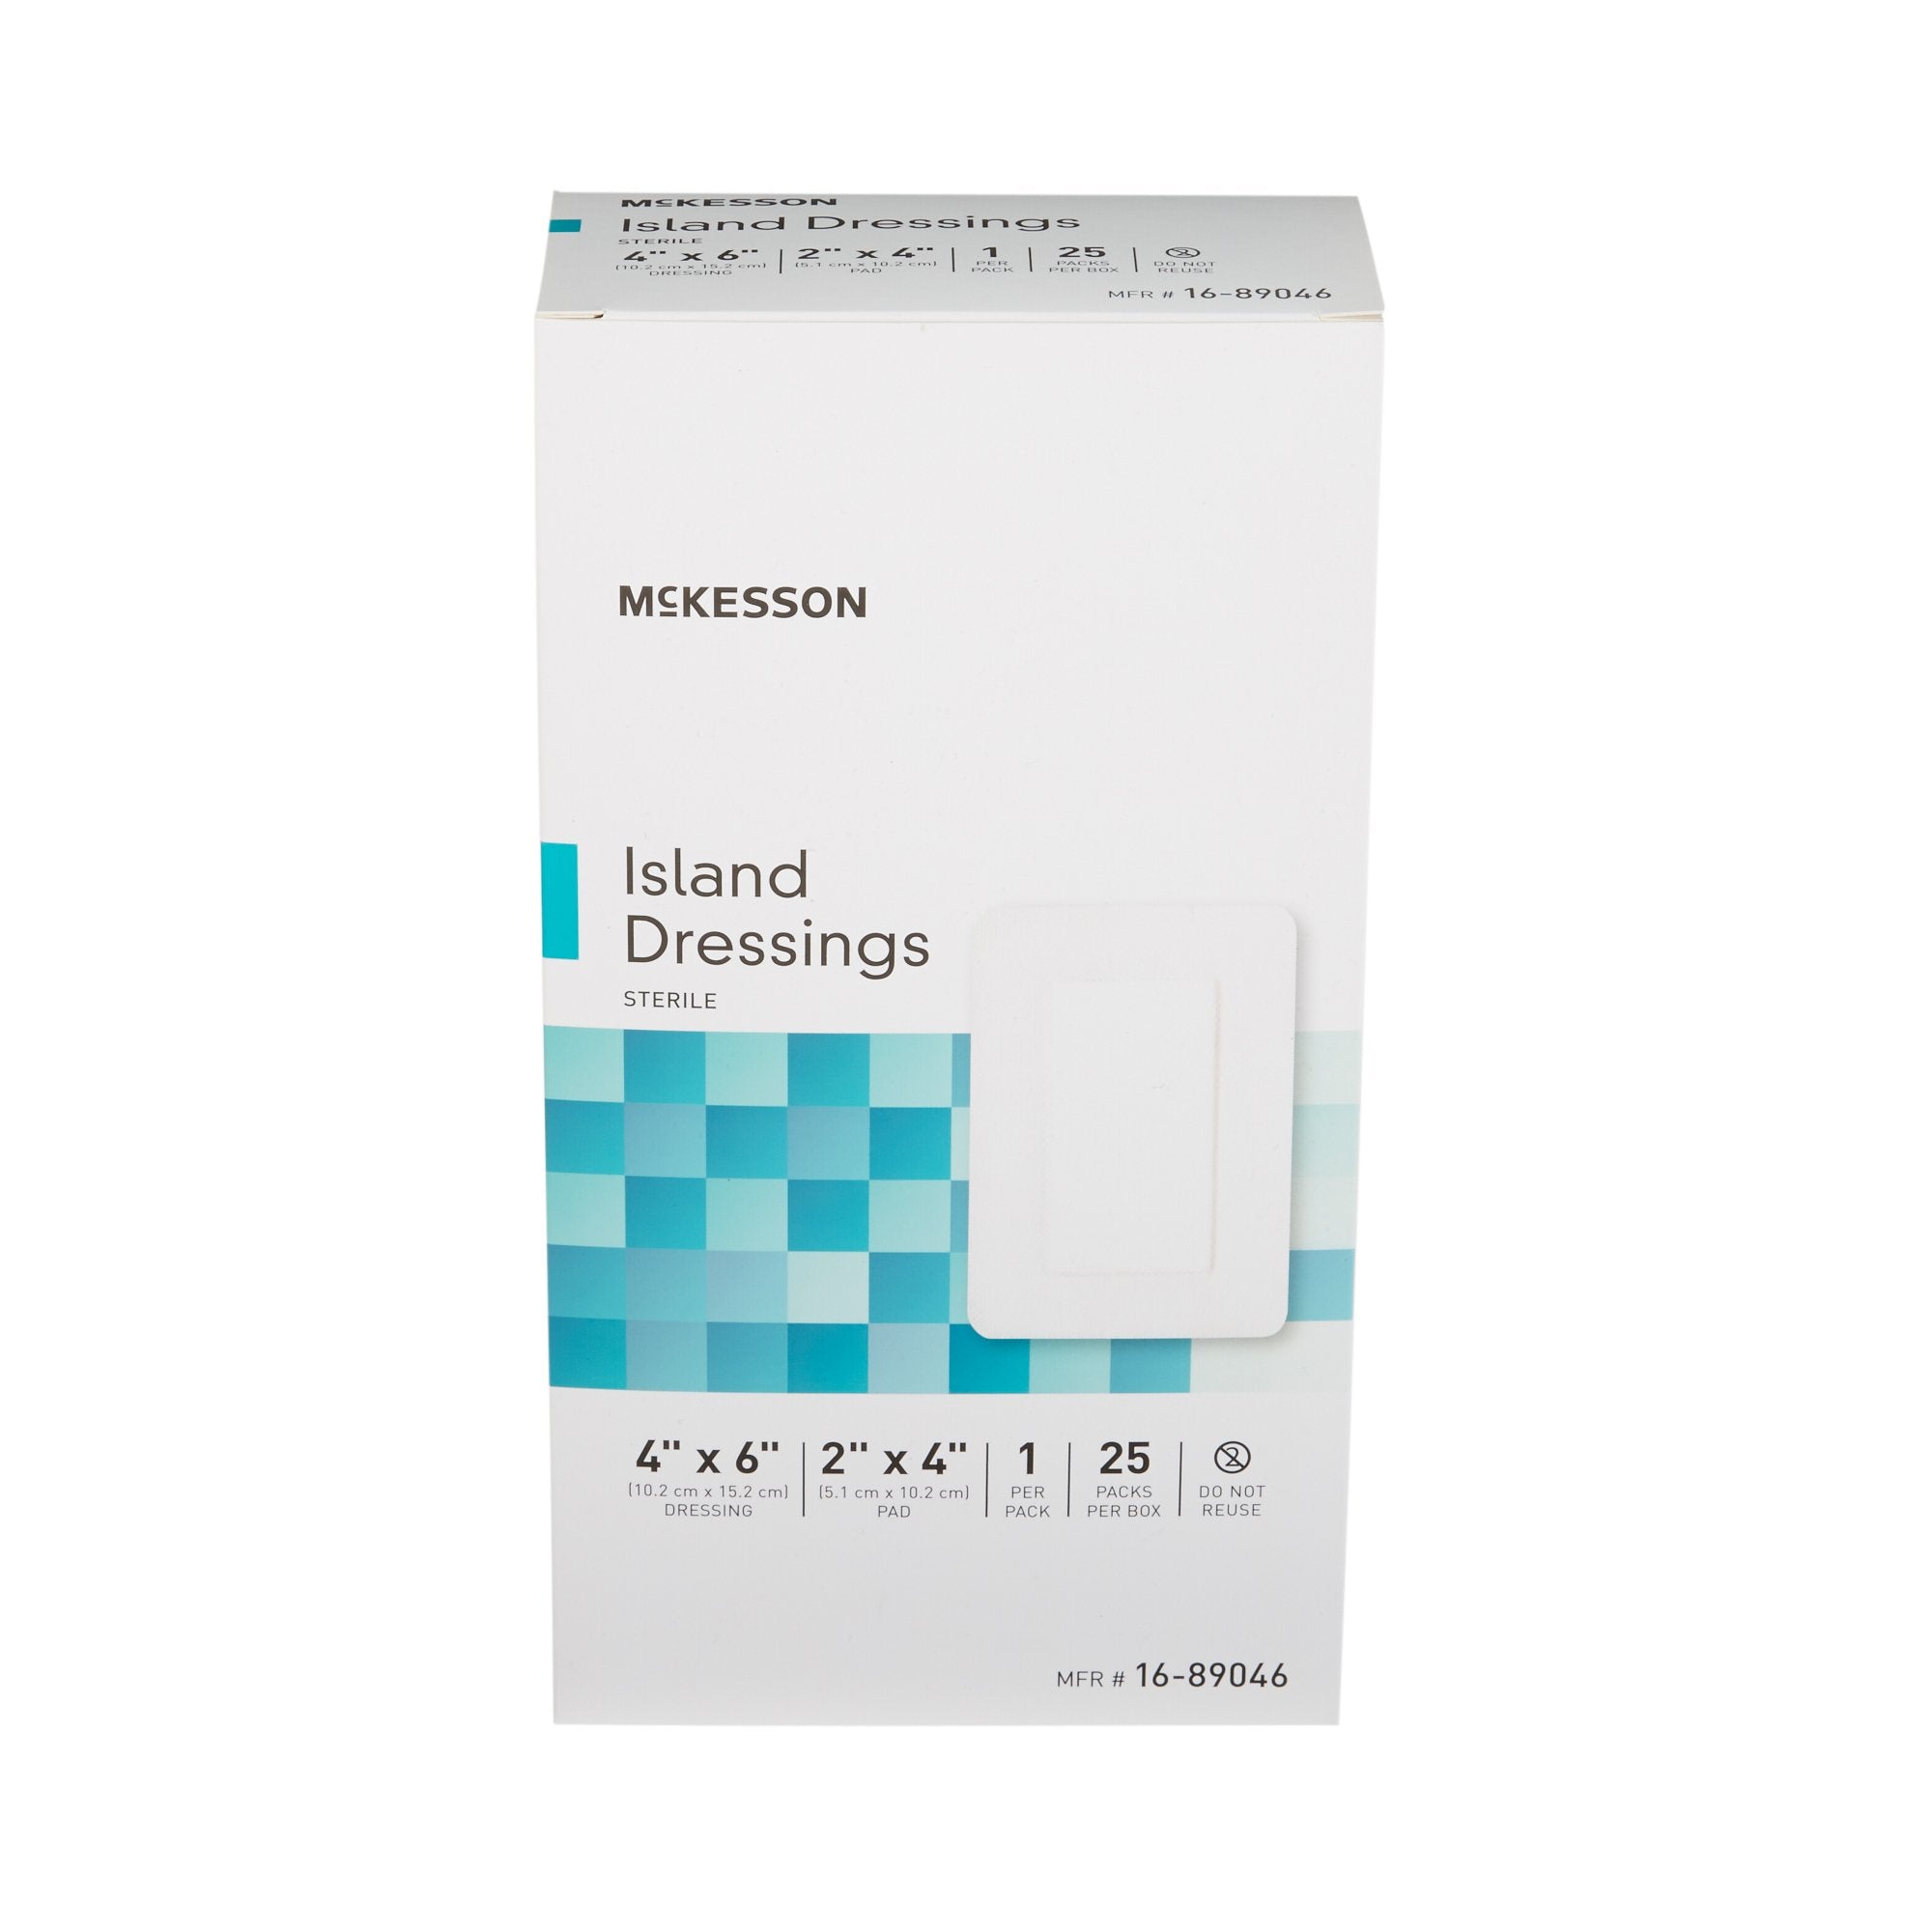 Adhesive Dressing McKesson 4 X 6 Inch Polypropylene / Rayon Rectangle White Sterile